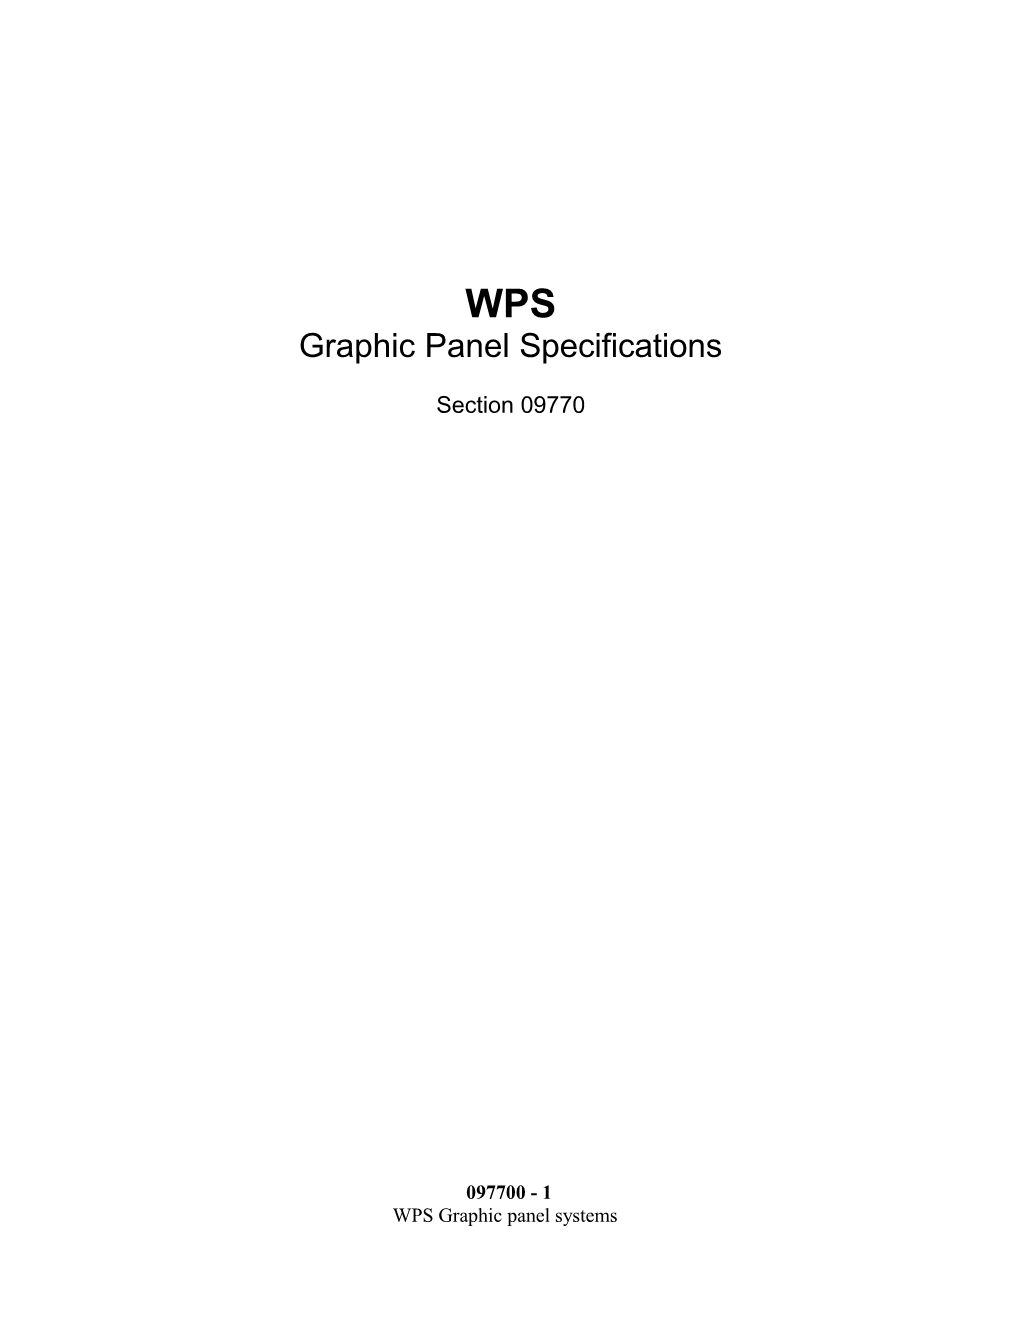 WPS Graphic Panel Systems